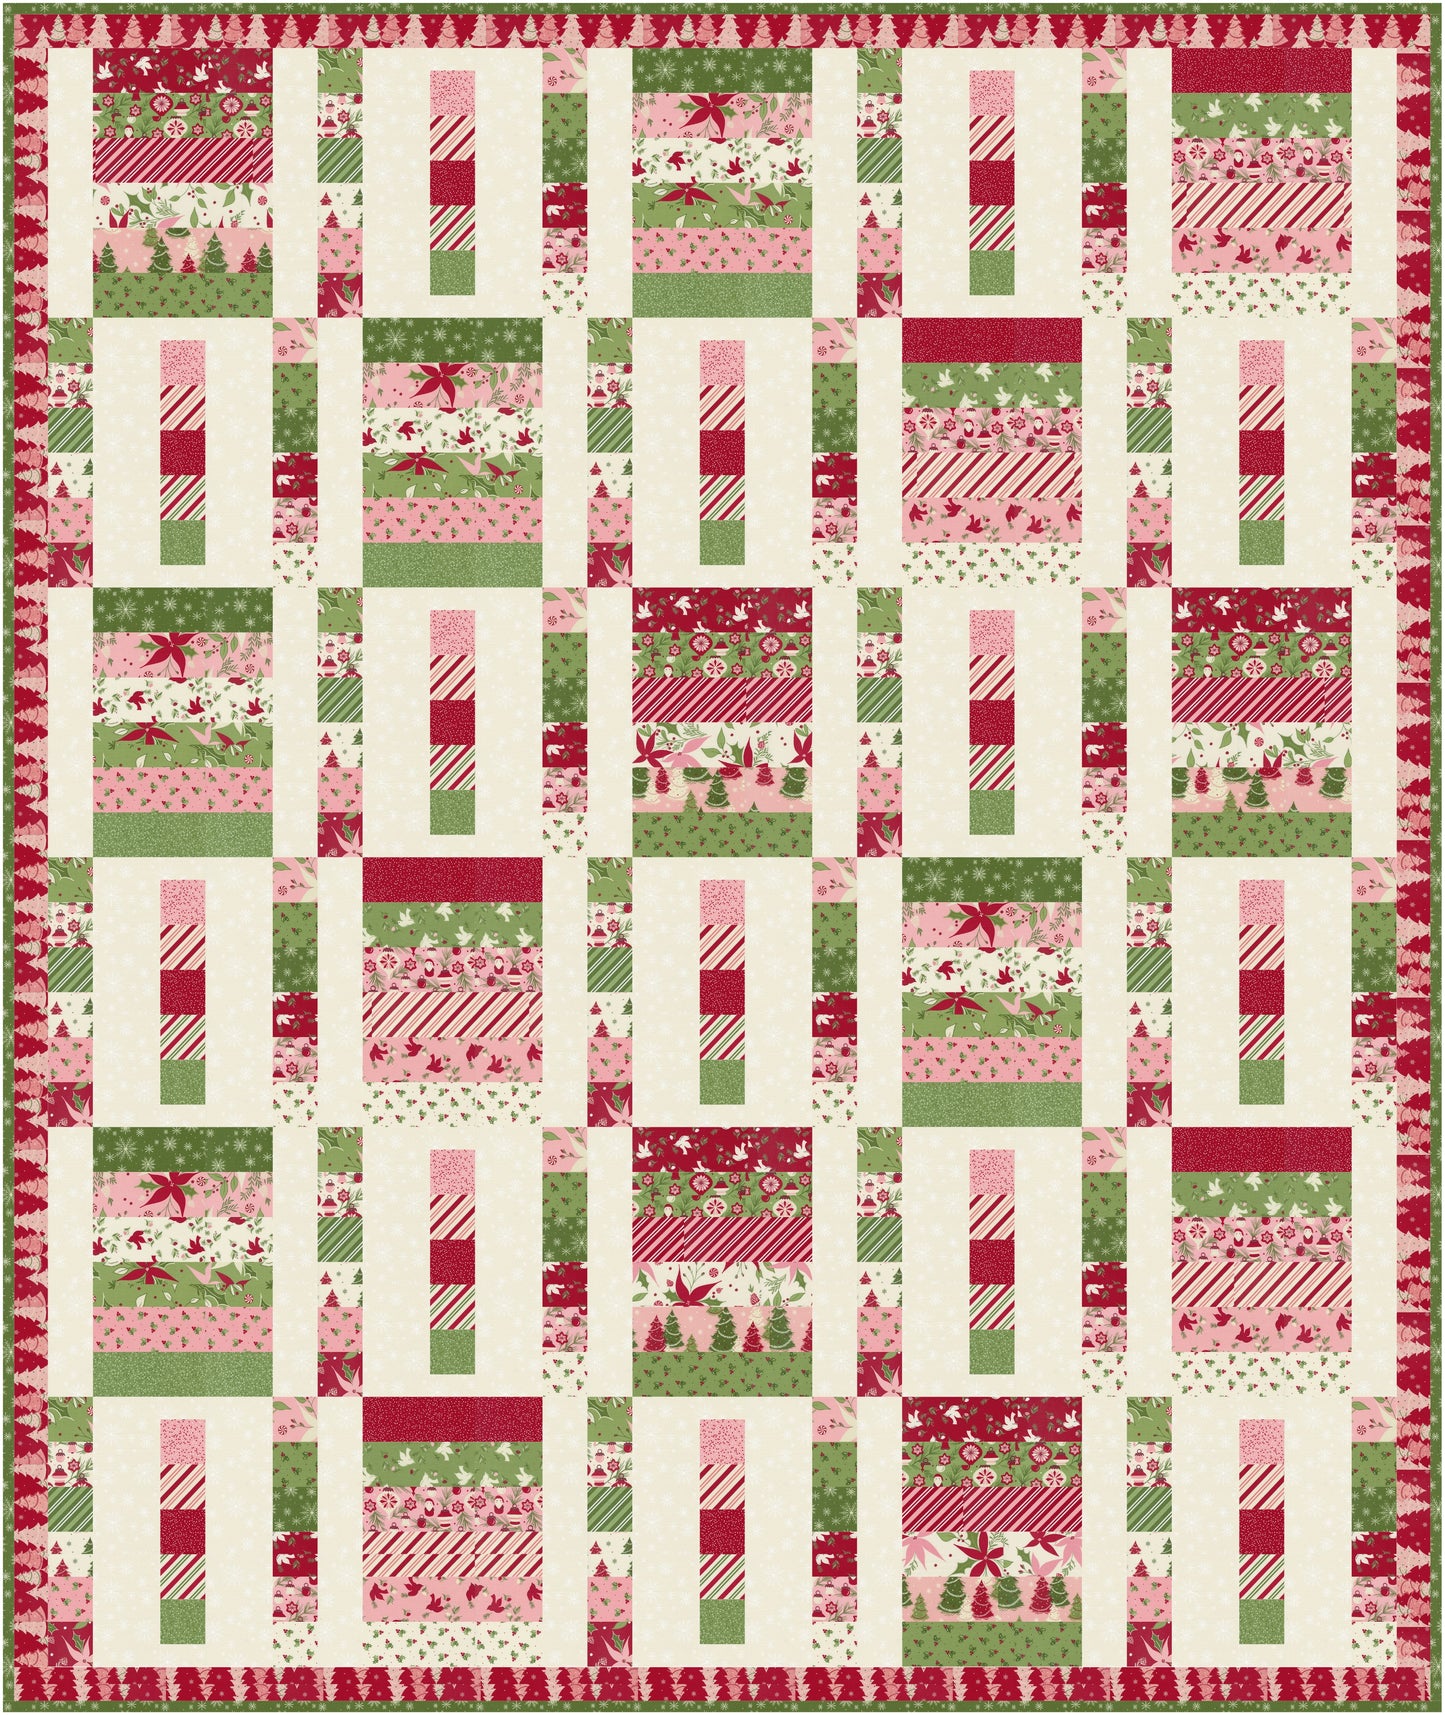 NEW! Once Upon a Christmas "Wrapping Party" Quilt Pattern + Bench Pillow Pattern (Downloadable PDF)